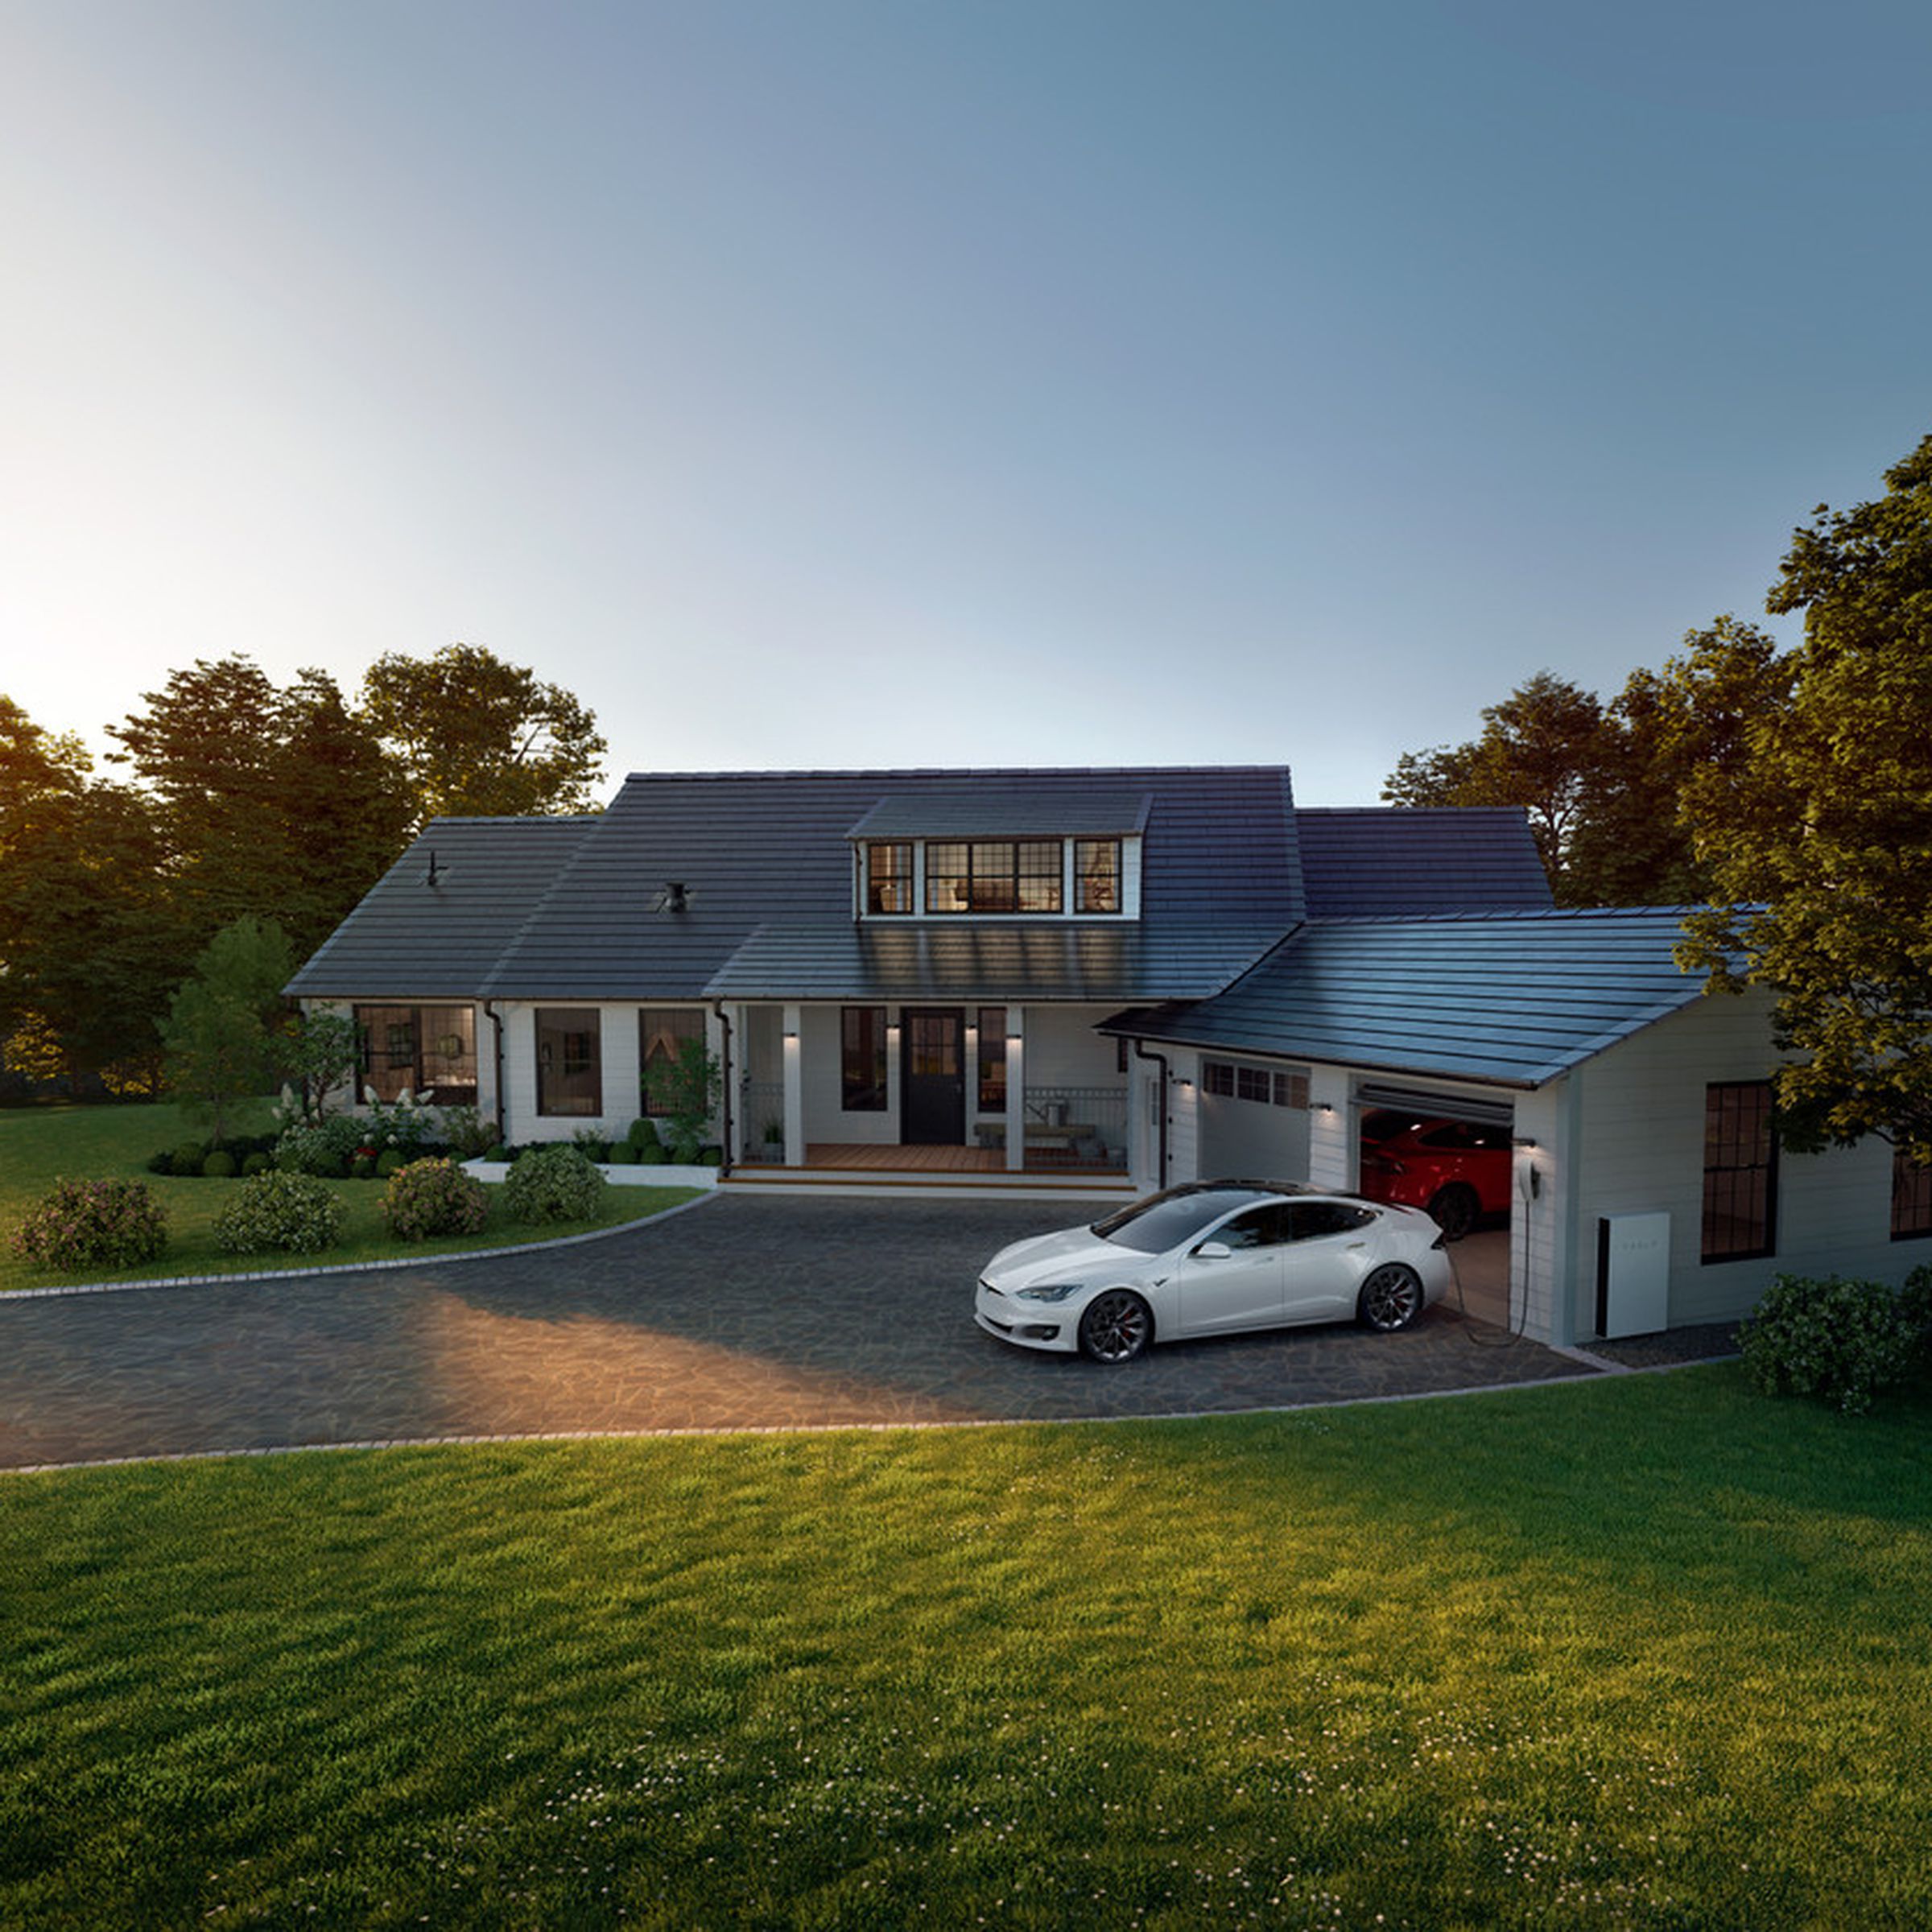 Zoomed-out view of a house with shiny shingles on top, which is the Solar Roof, and there is a white Tesla Model S in the driveway with one of two garage doors open and a Tesla Powerwall battery installed outside the house